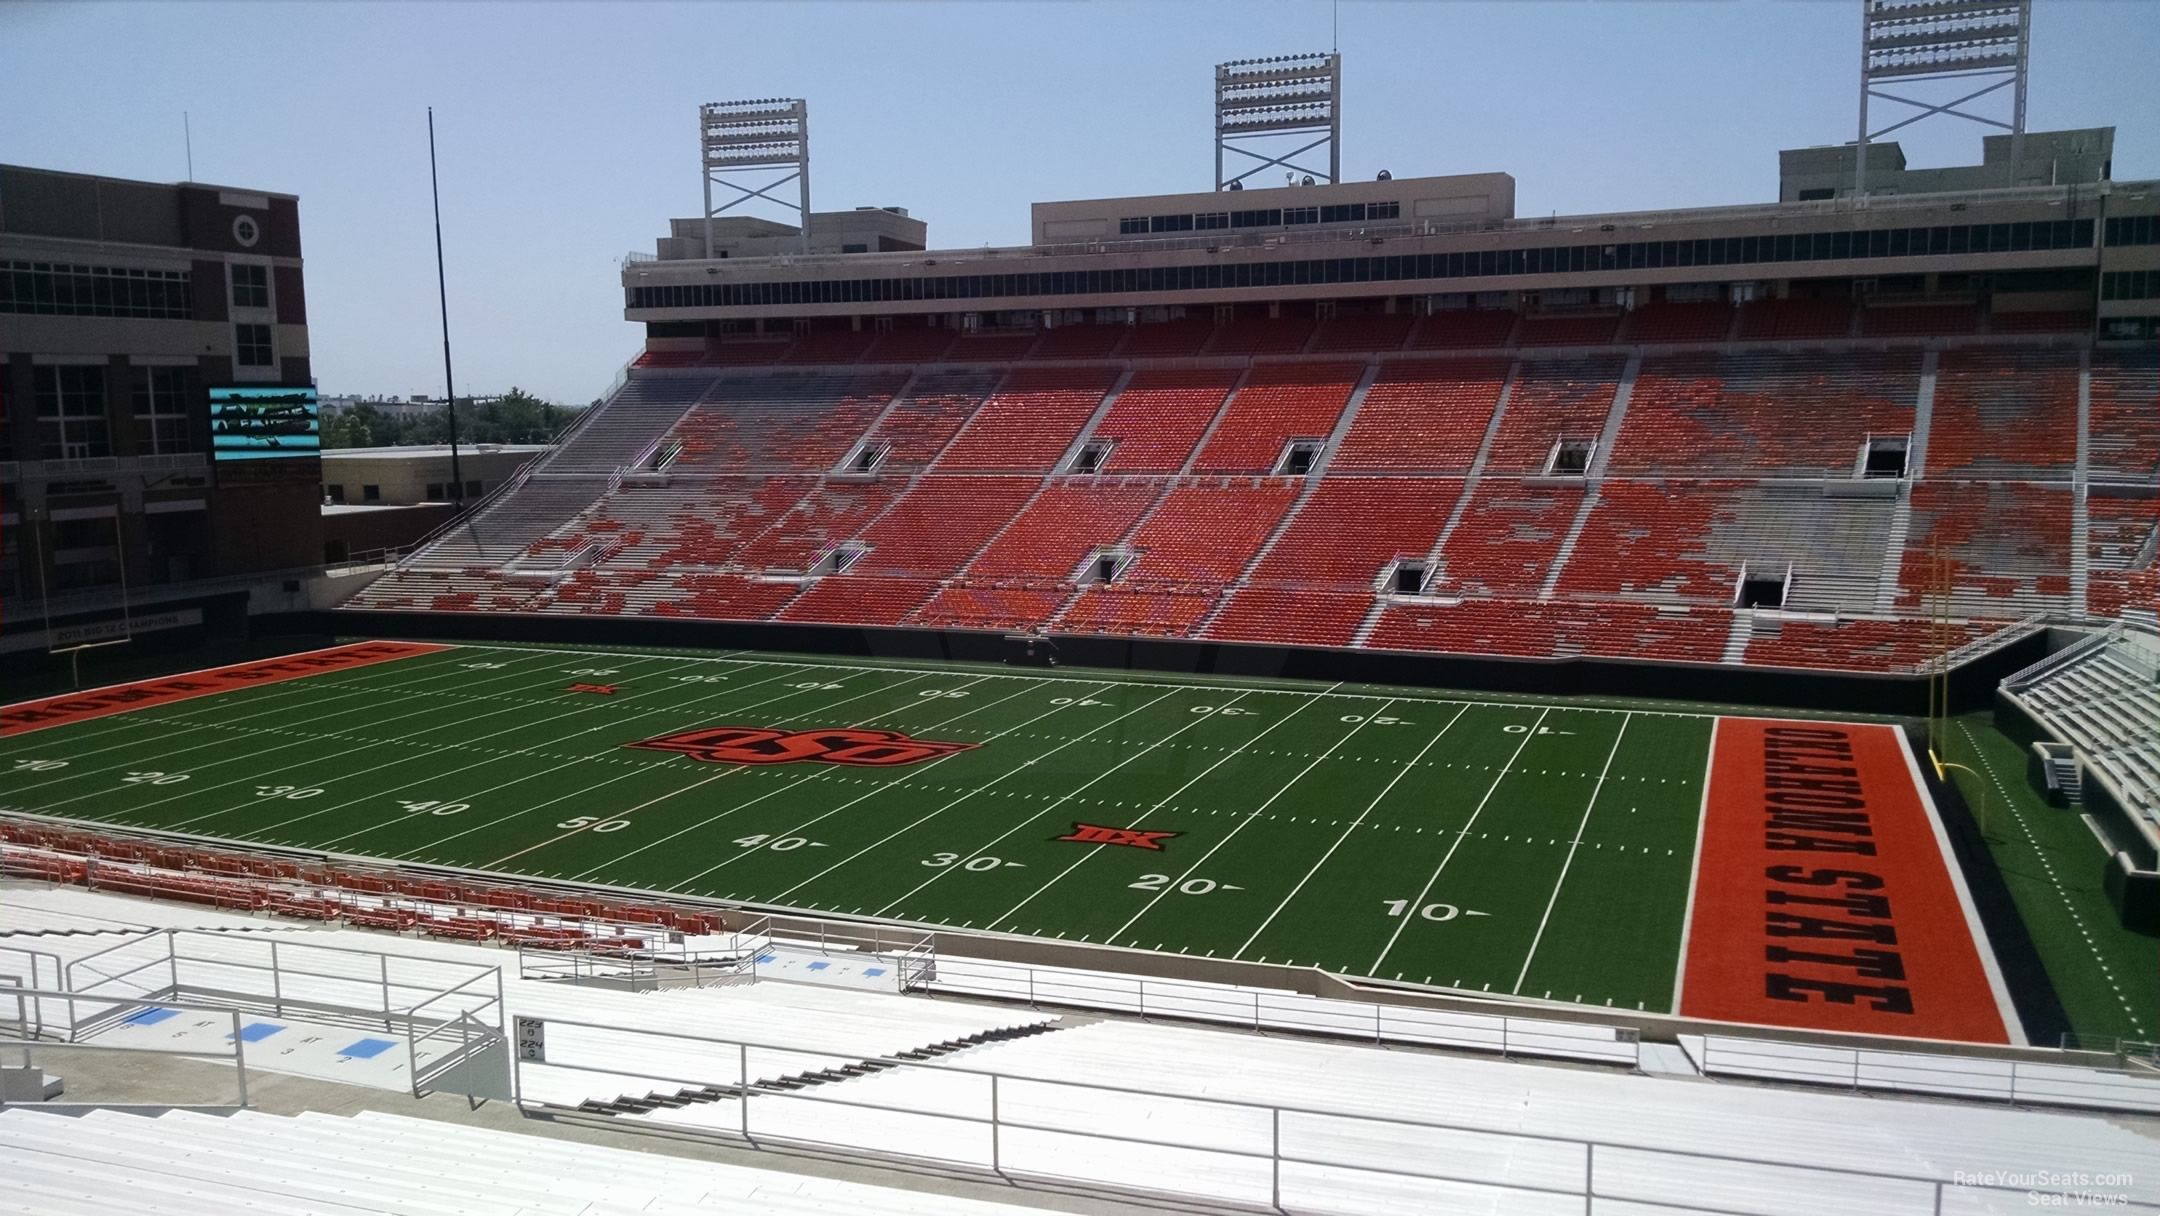 section 329, row 19 seat view  - boone pickens stadium